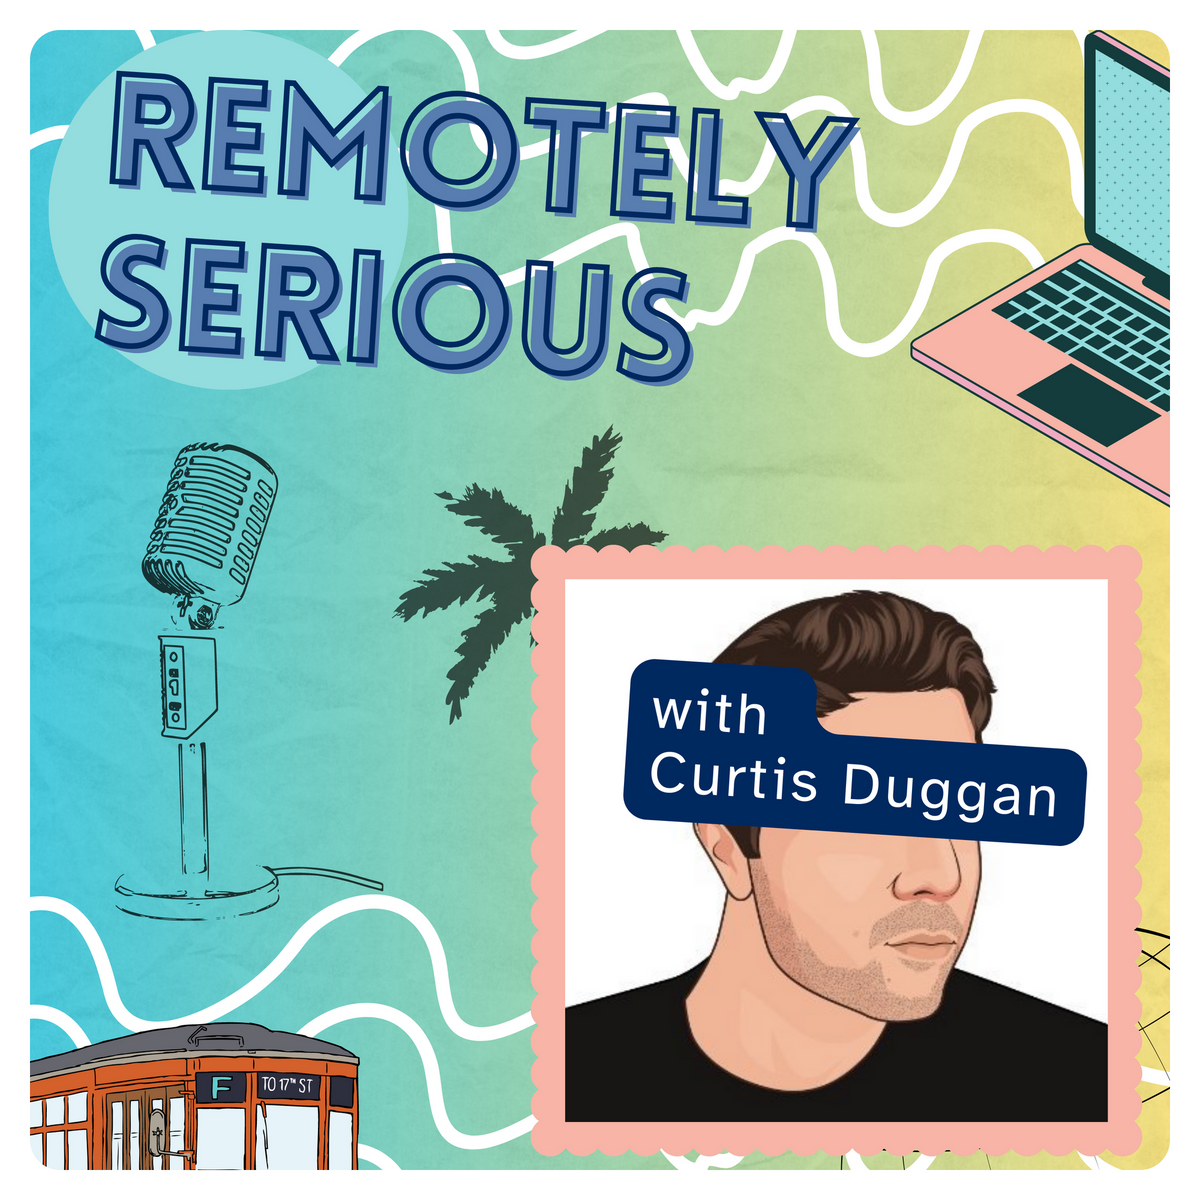 New podcast: "Remotely Serious" is out on all platforms.